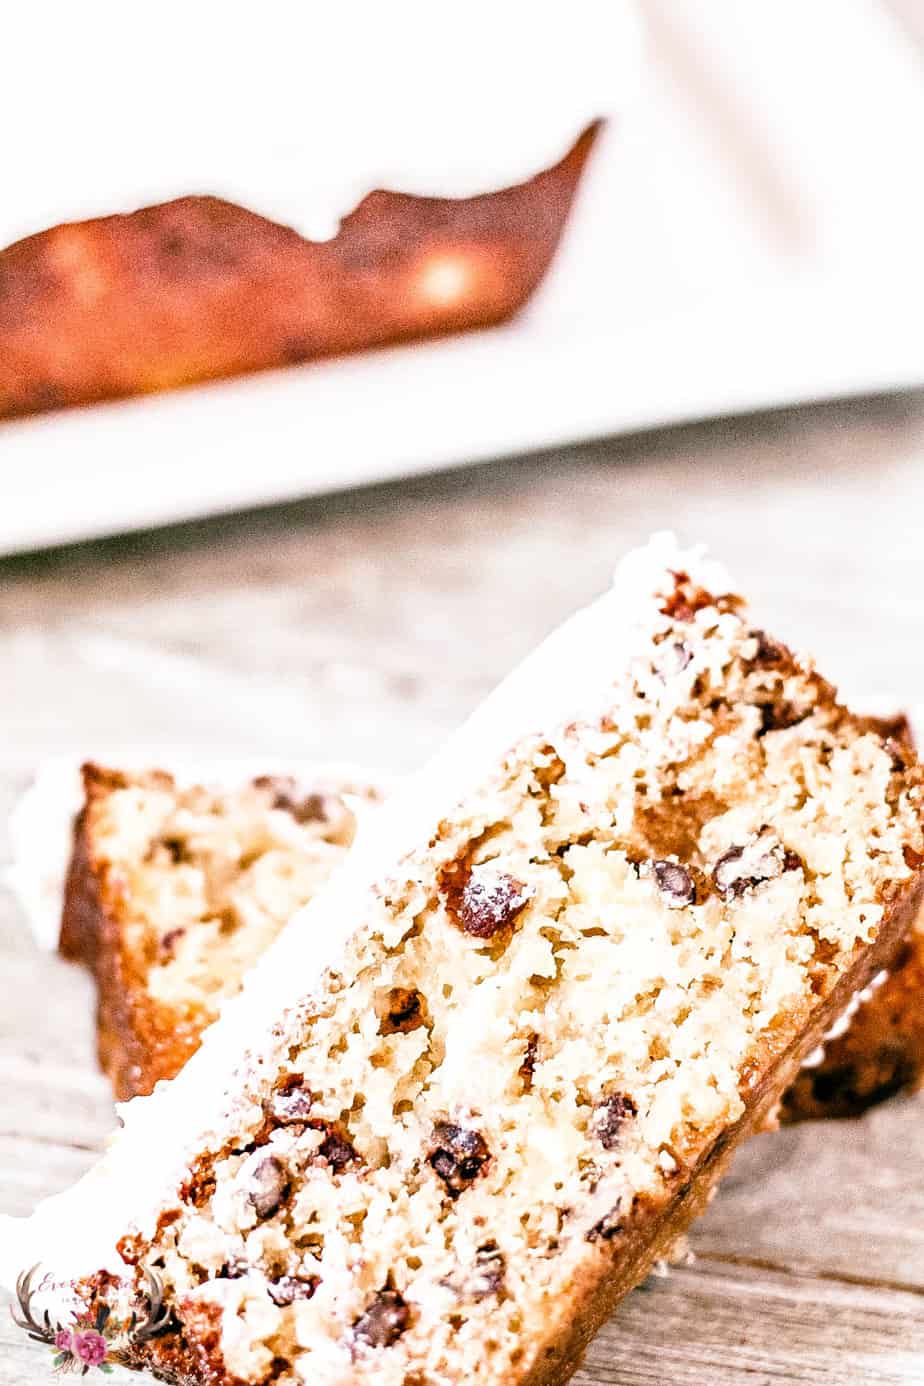 I love making cakes and this recipe for a Pineapple Pecan Pound Cake is an easy and delicious cake. Bake this cake in a loaf pan, it is moist and filled with pieces of pineapple and pecans.